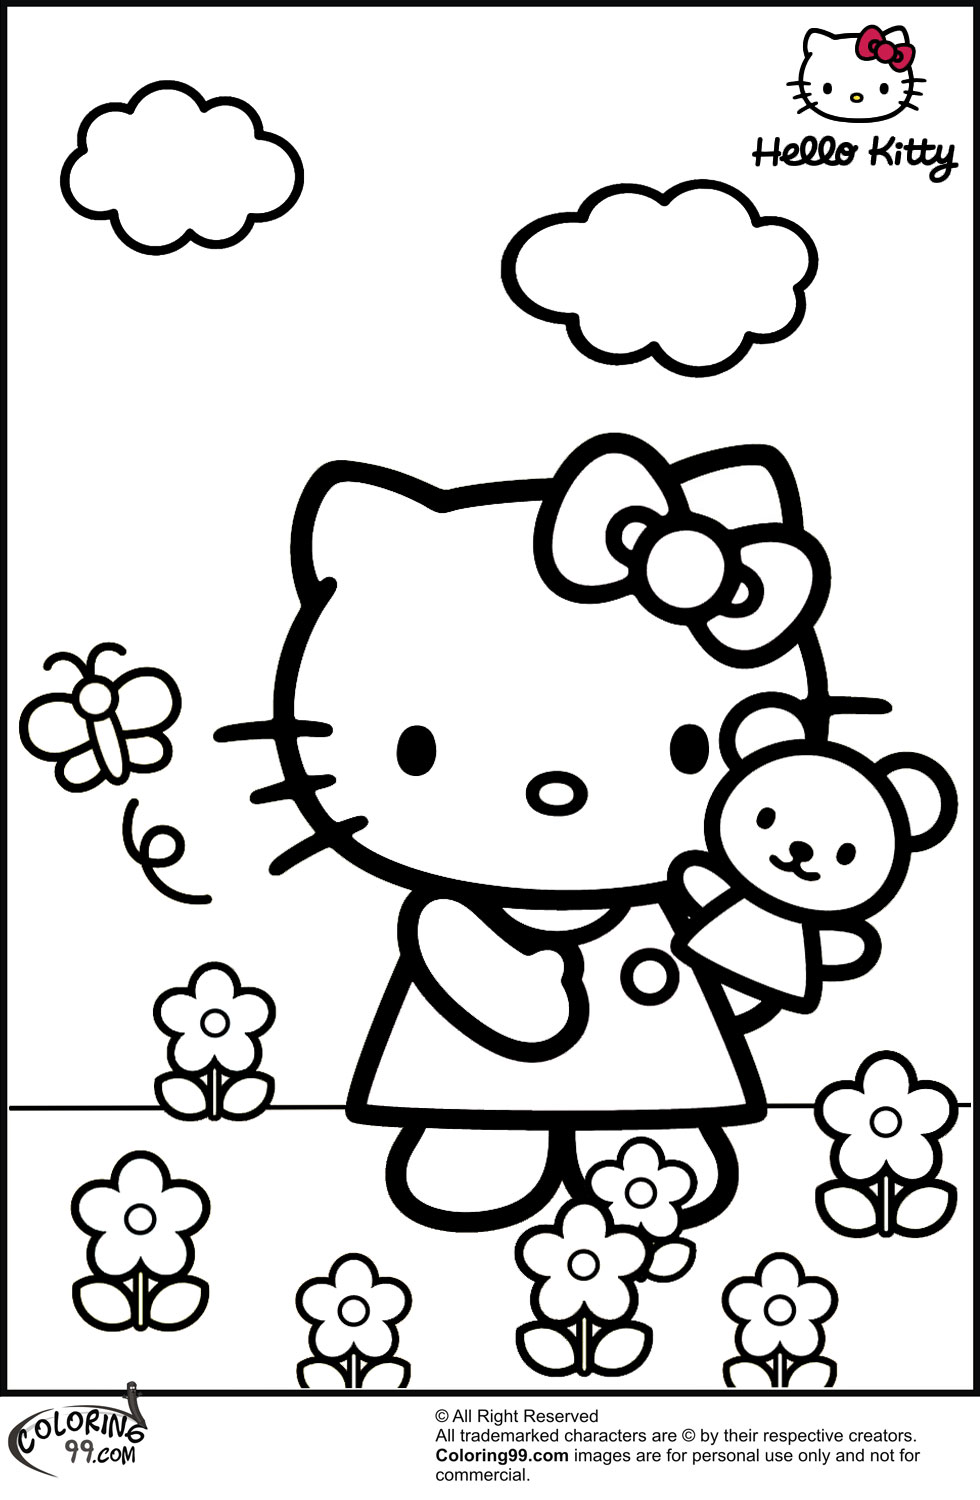 Download Hello Kitty Coloring Pages | Team colors